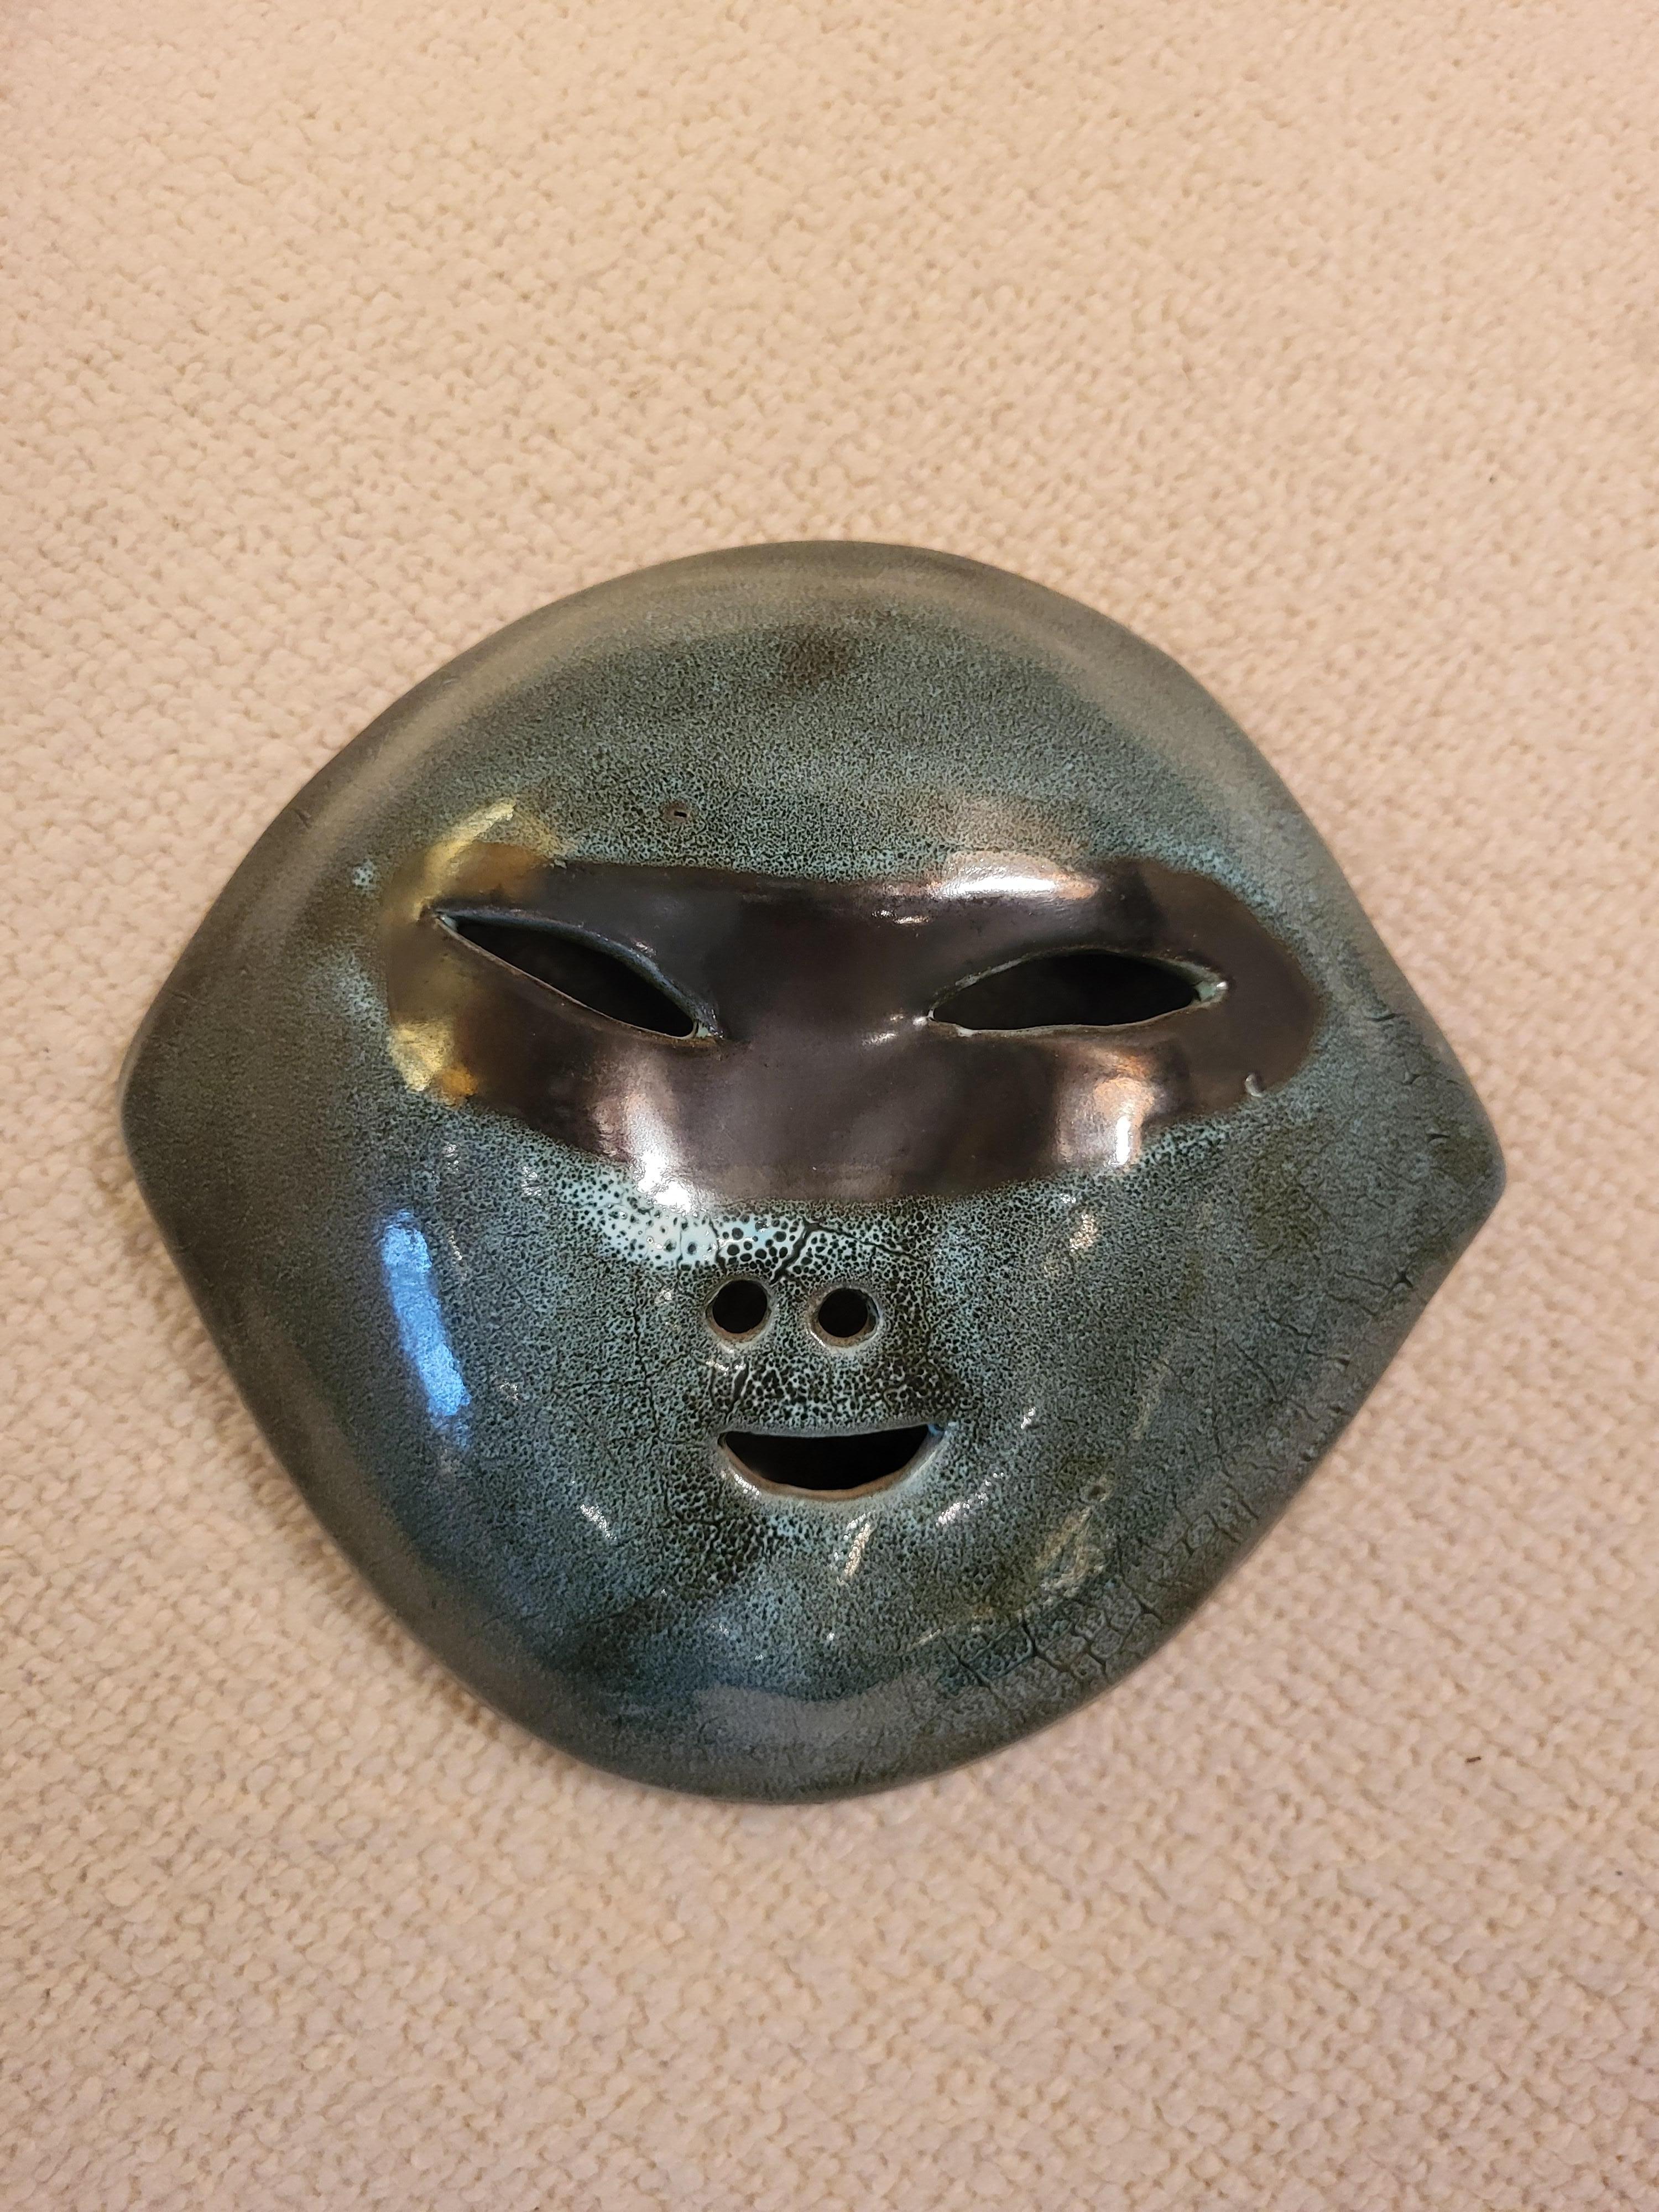 Mask by Accolay Pottery, active between 1945 and 1983, signed